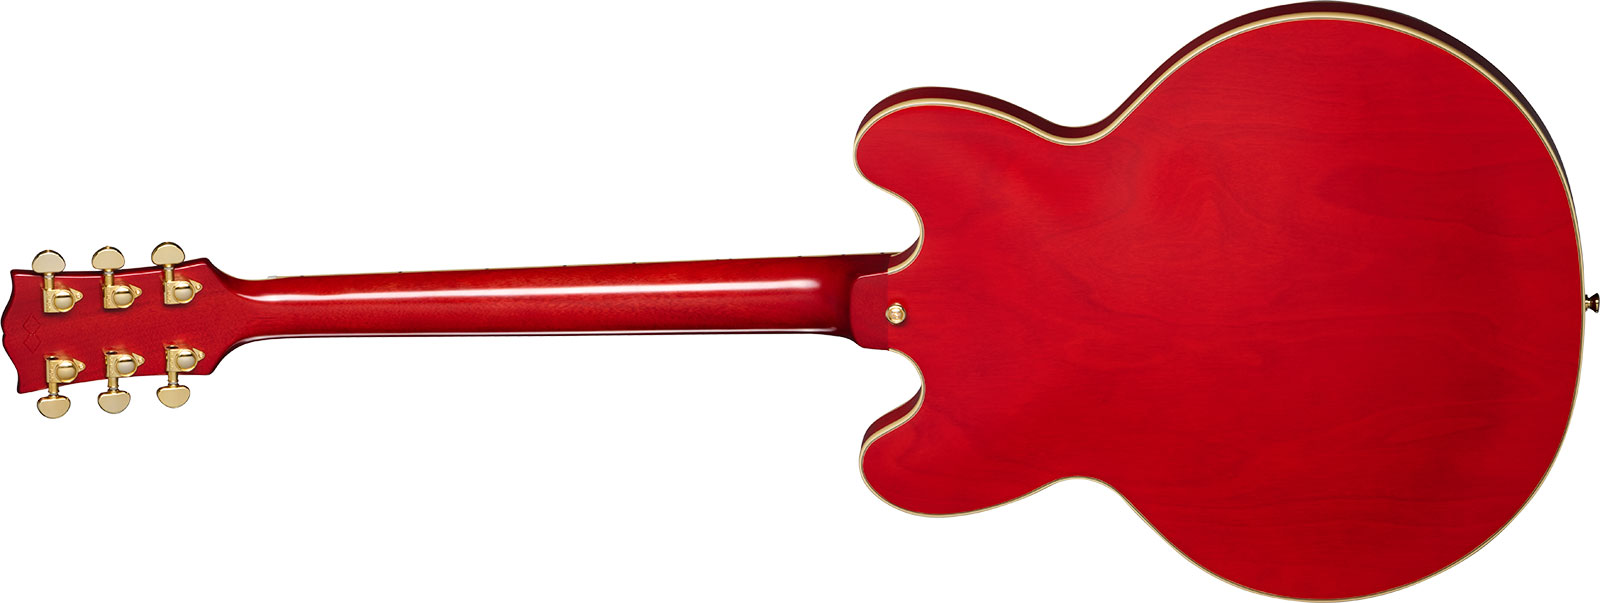 Epiphone Es355 1959 Inspired By 2h Gibson Ht Eb - Vos Cherry Red - Semi-hollow electric guitar - Variation 1